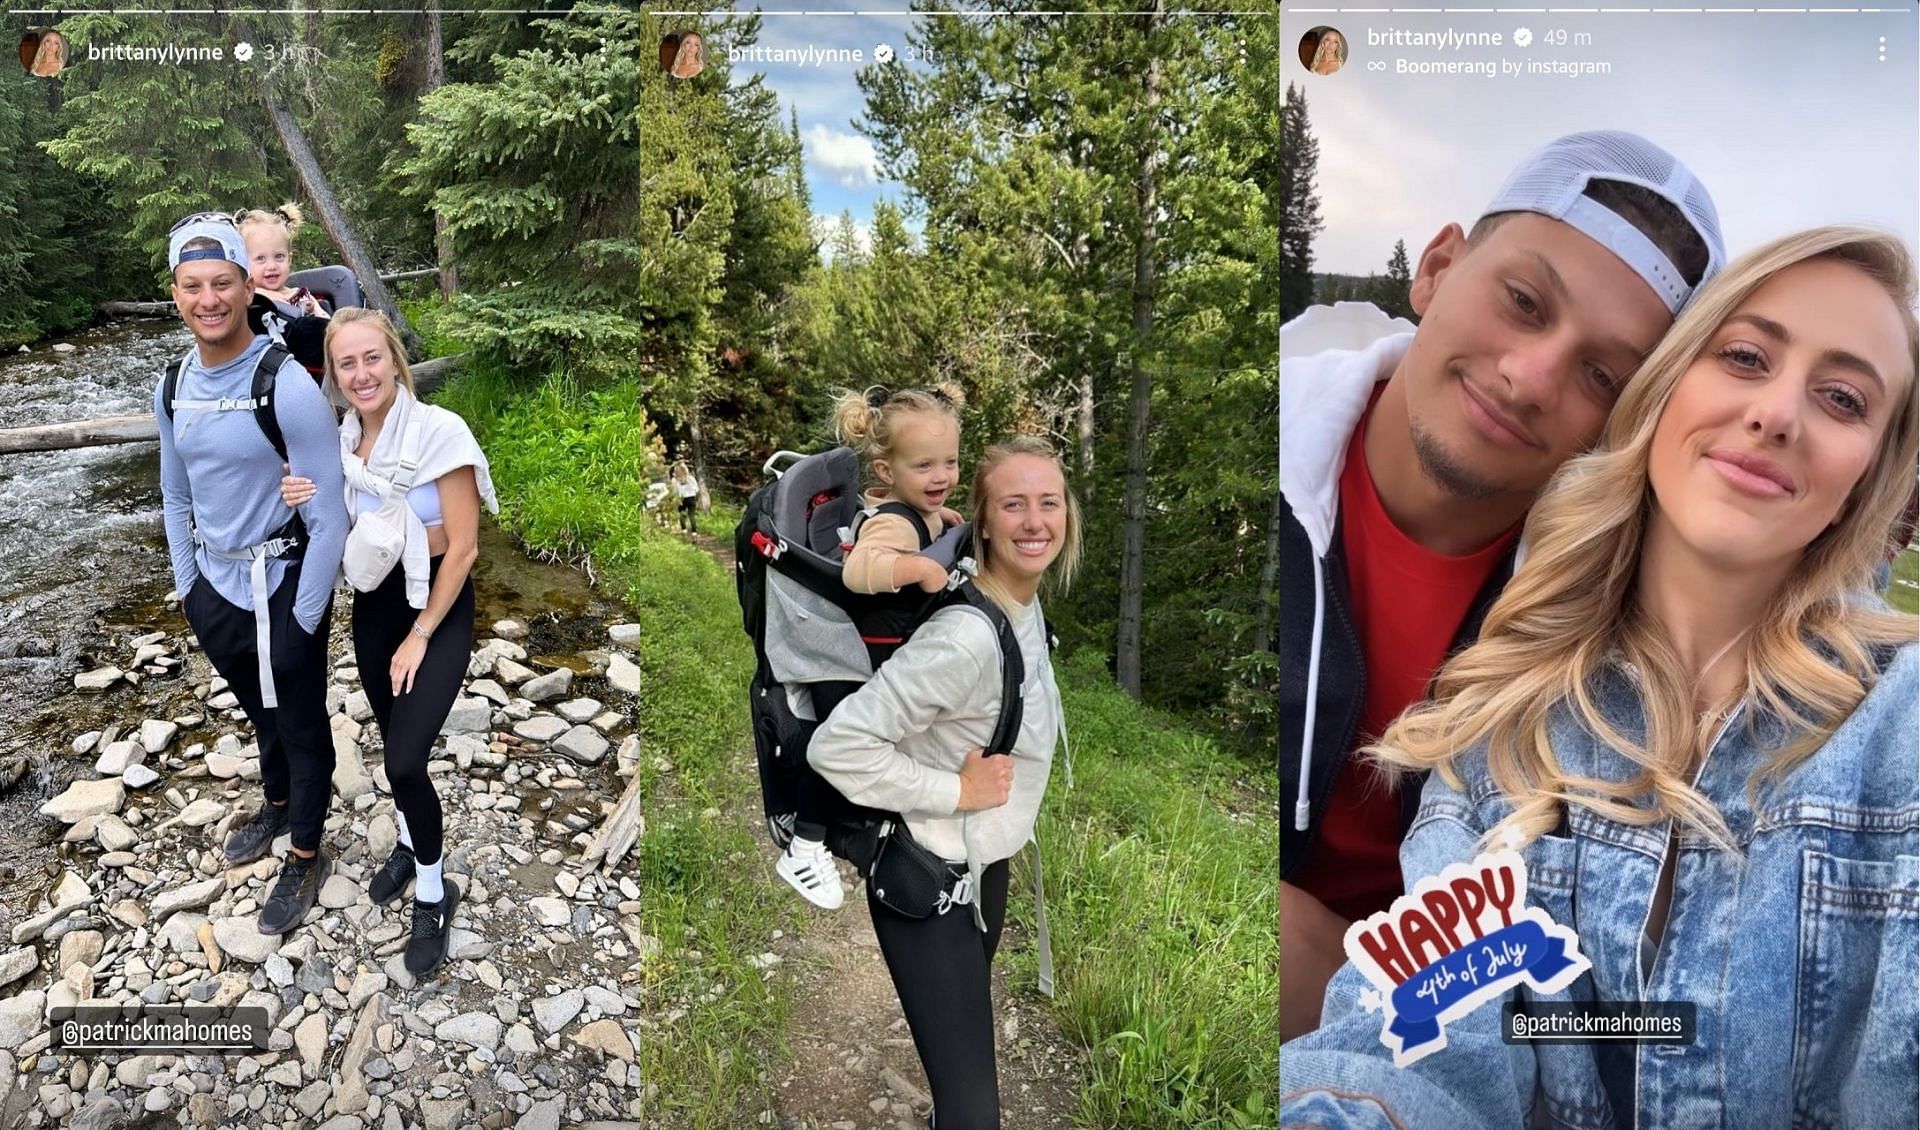 Patrick Mahomes, wife Brittany celebrate 4th of July with adventurous hiking trip